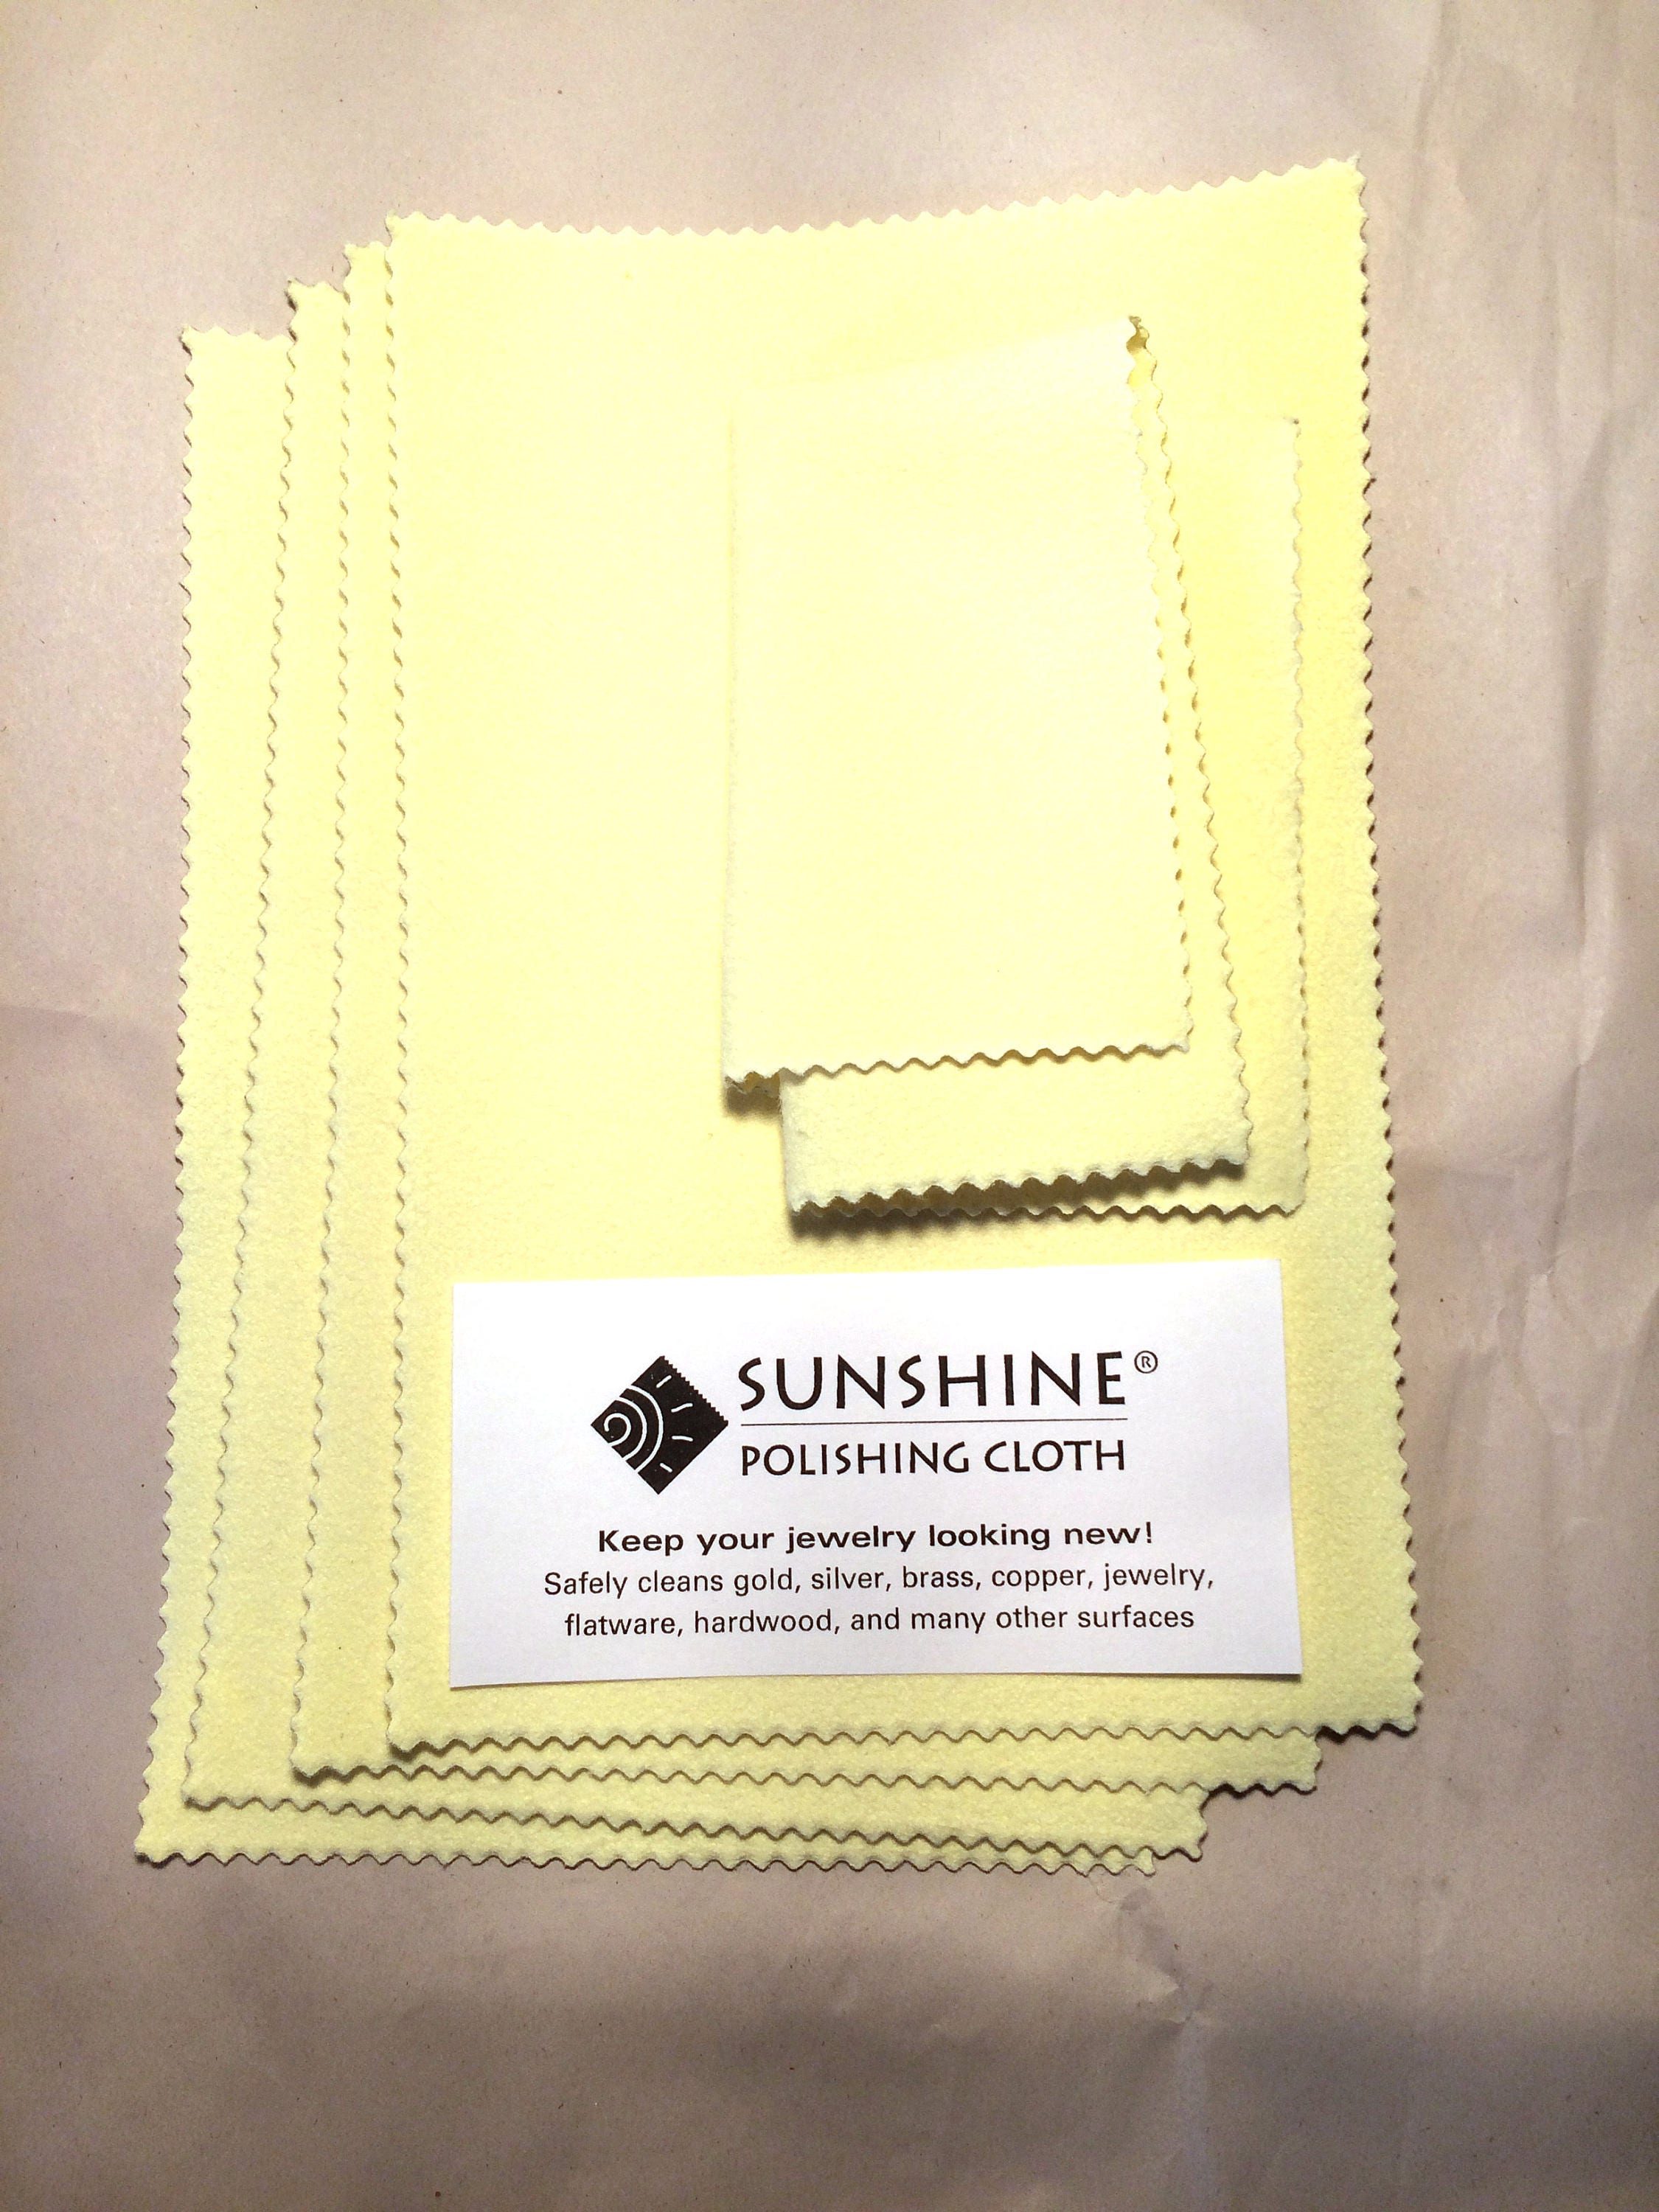 LARGE Sunshine Polishing Cloth for Jewelry for Only 2.99 7 1/2 Inches X 5  Inchesjewelry Polishing Clothsilver and Gold Polishing Cloth 